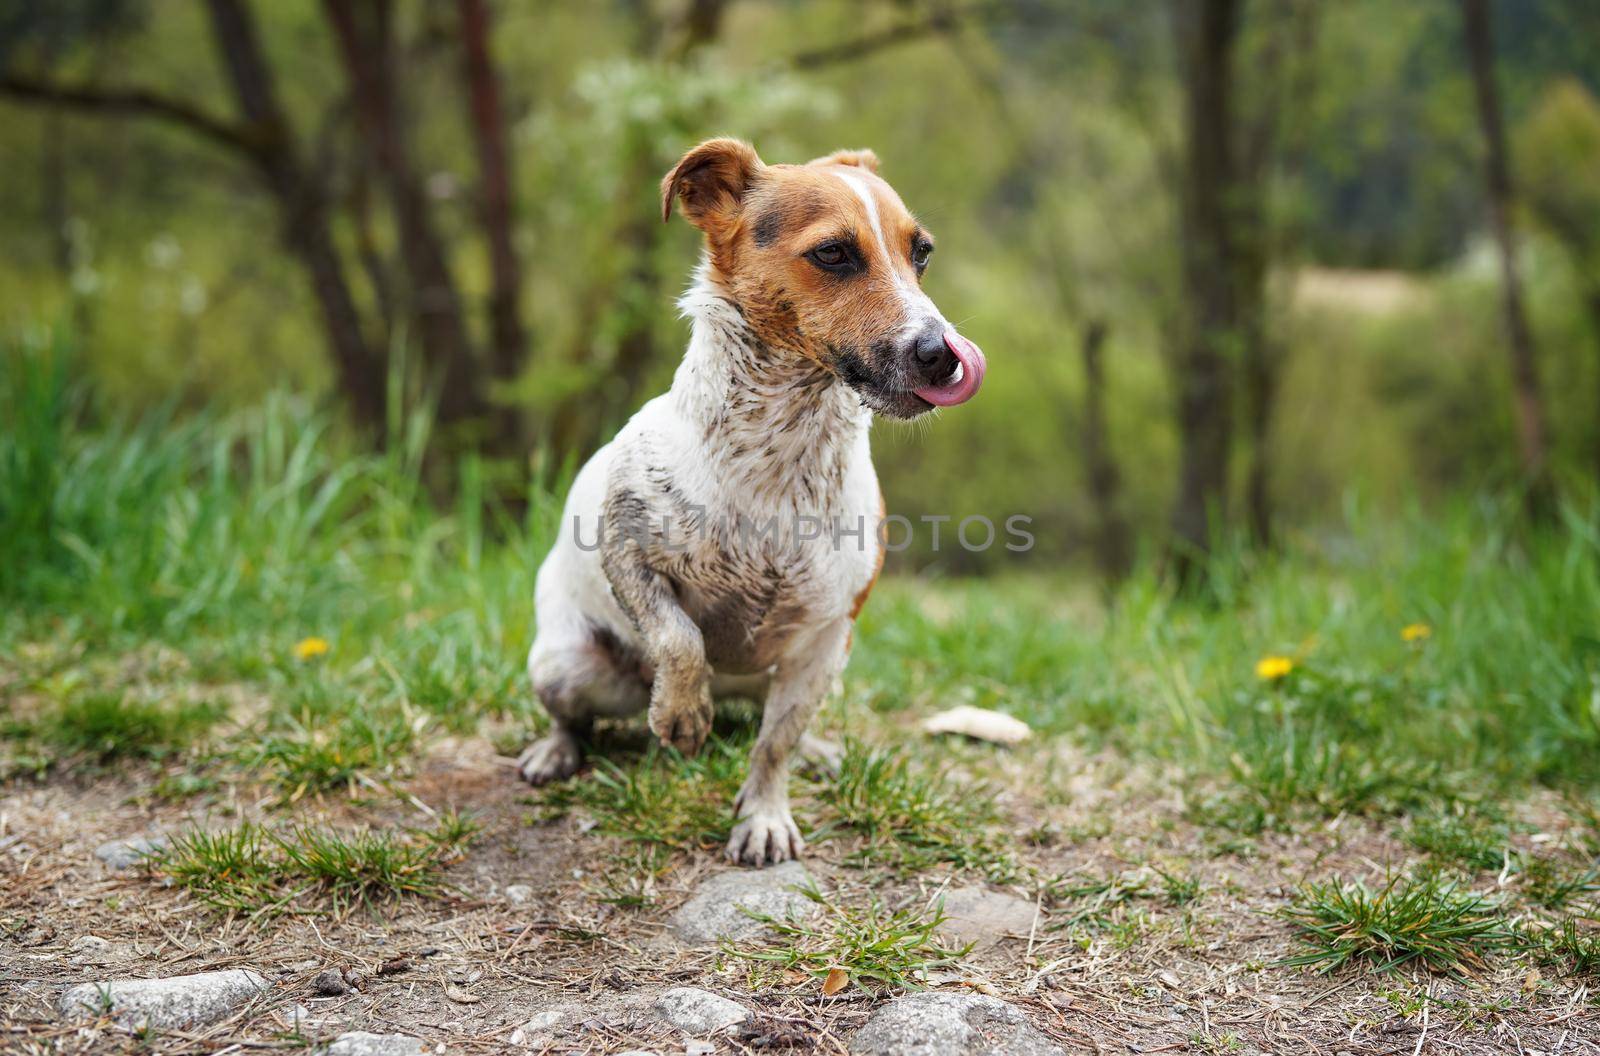 Small Jack Russell terrier sitting on ground, her fur very dirty, licking nose with tongue, grass and trees background.